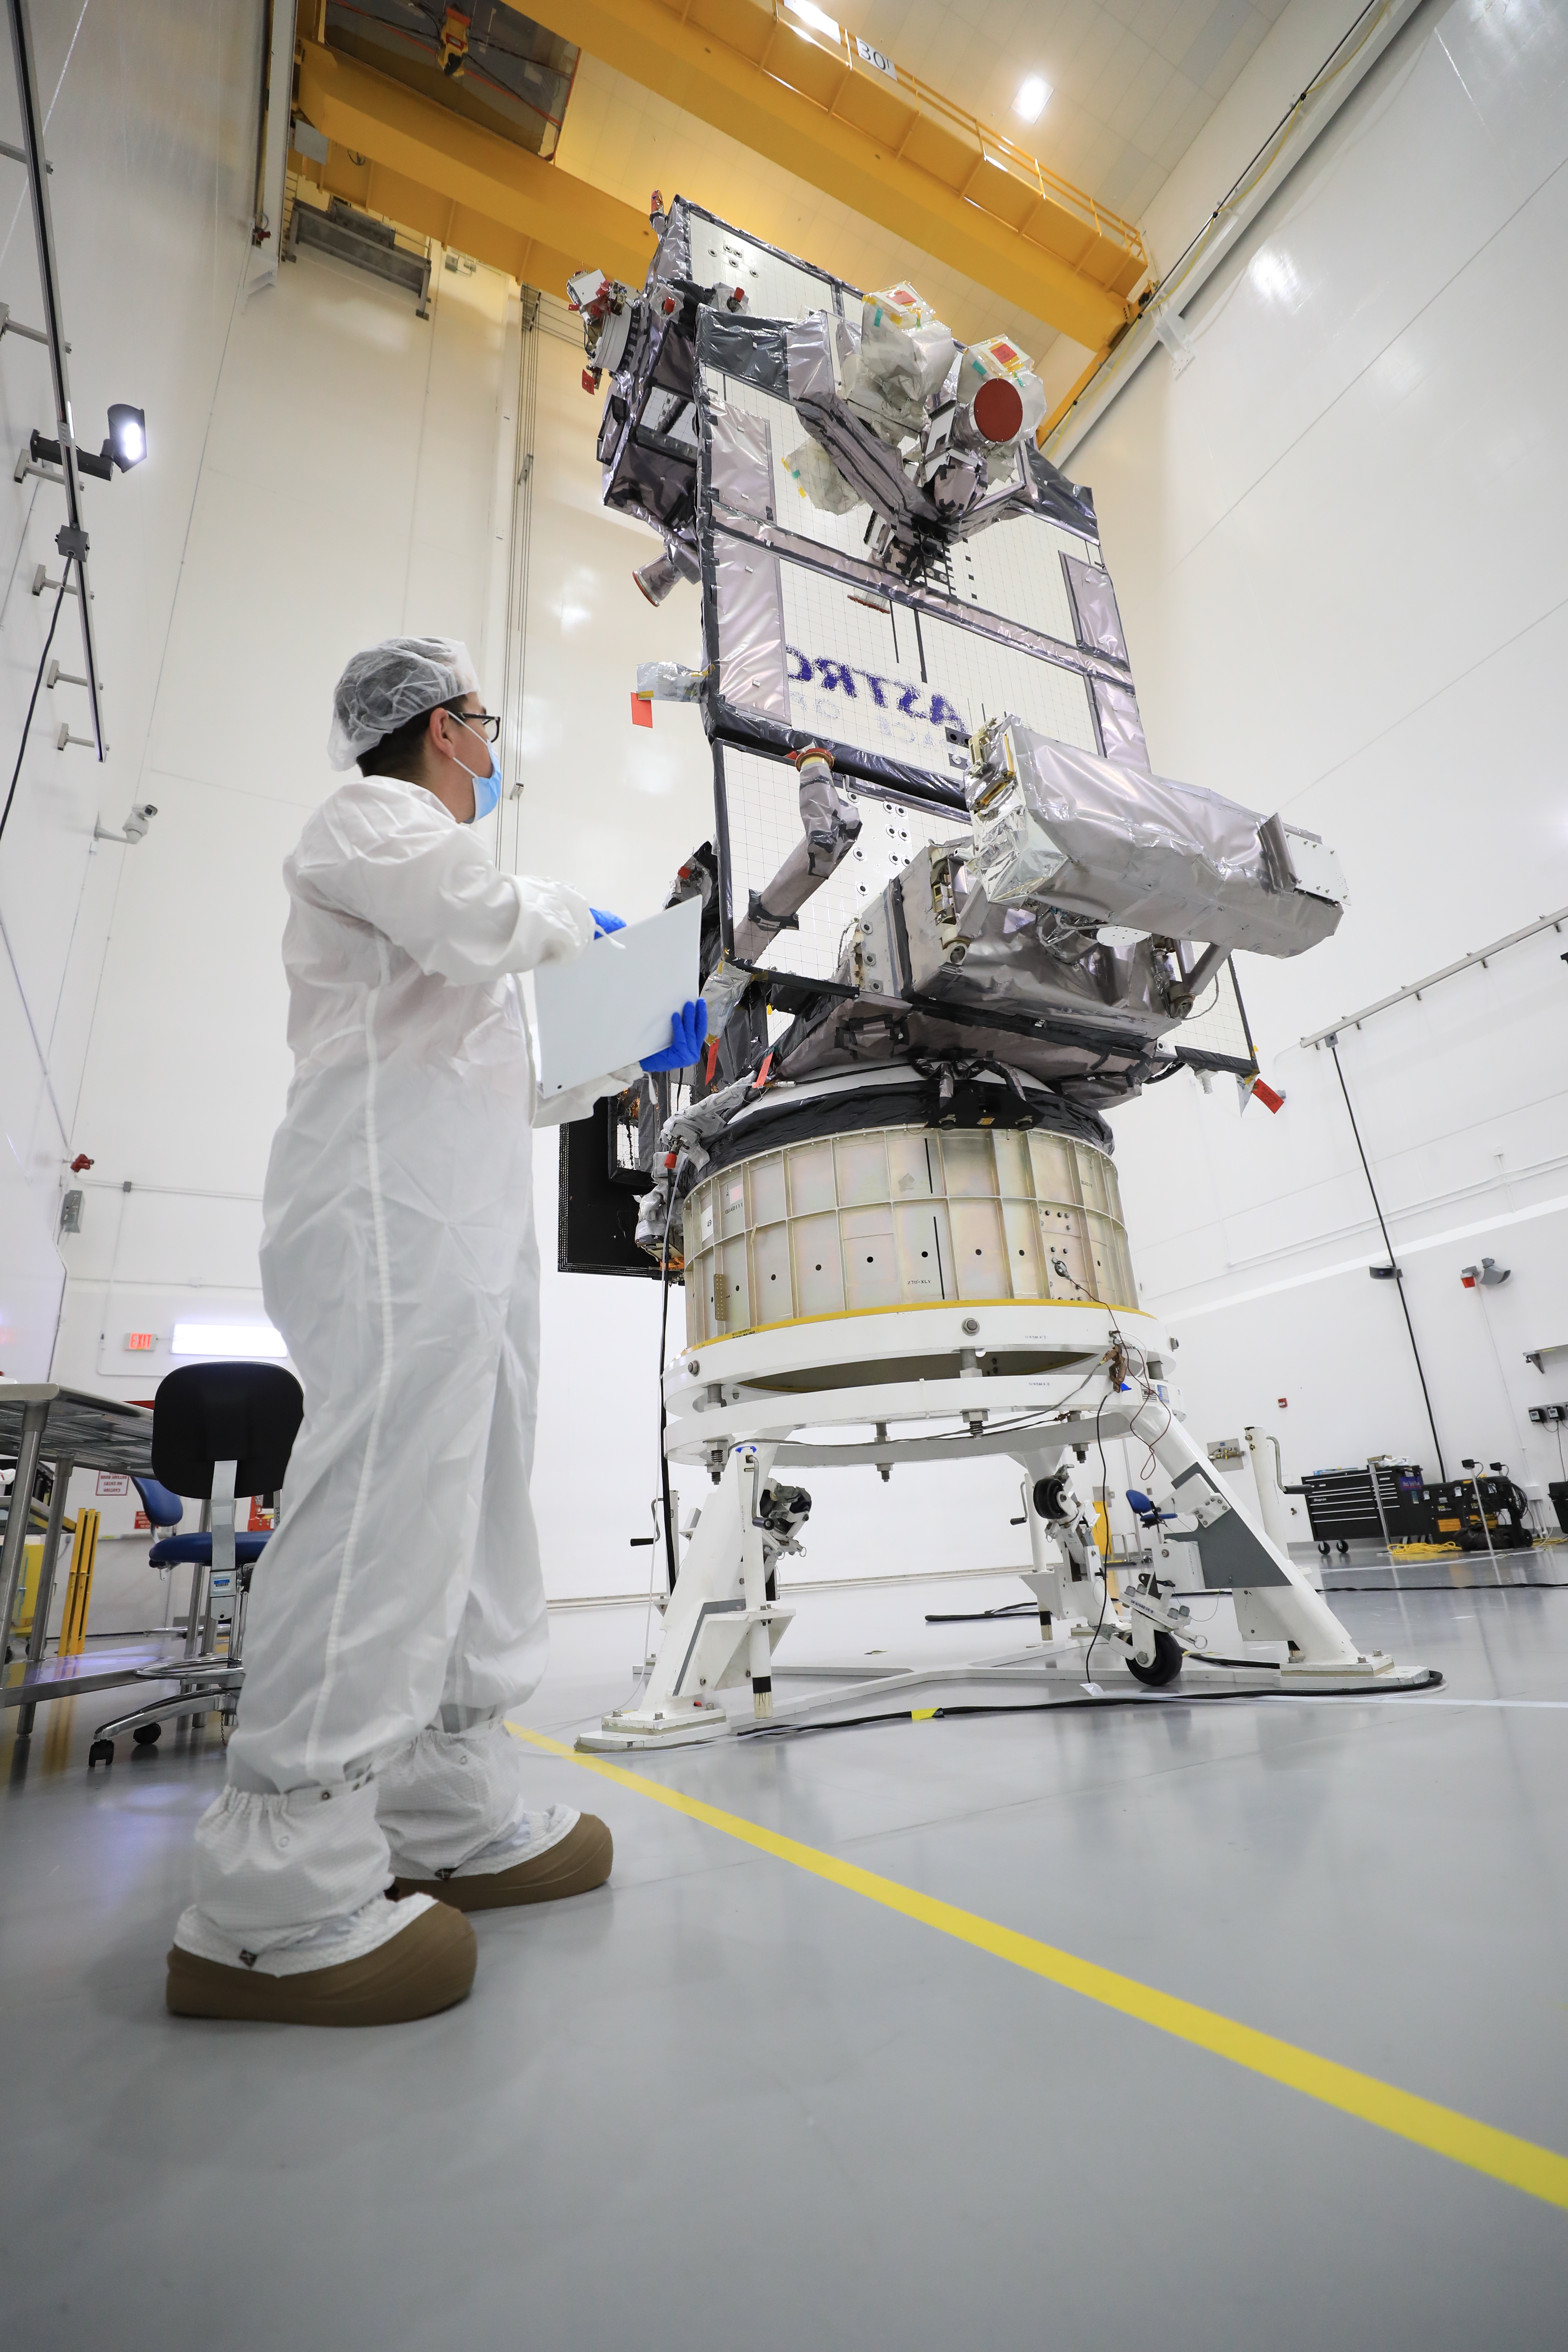 The Laser Communications Relay Demonstration undergoes final inspections at Astrotech Space Operations facility in Titusville, Florida.